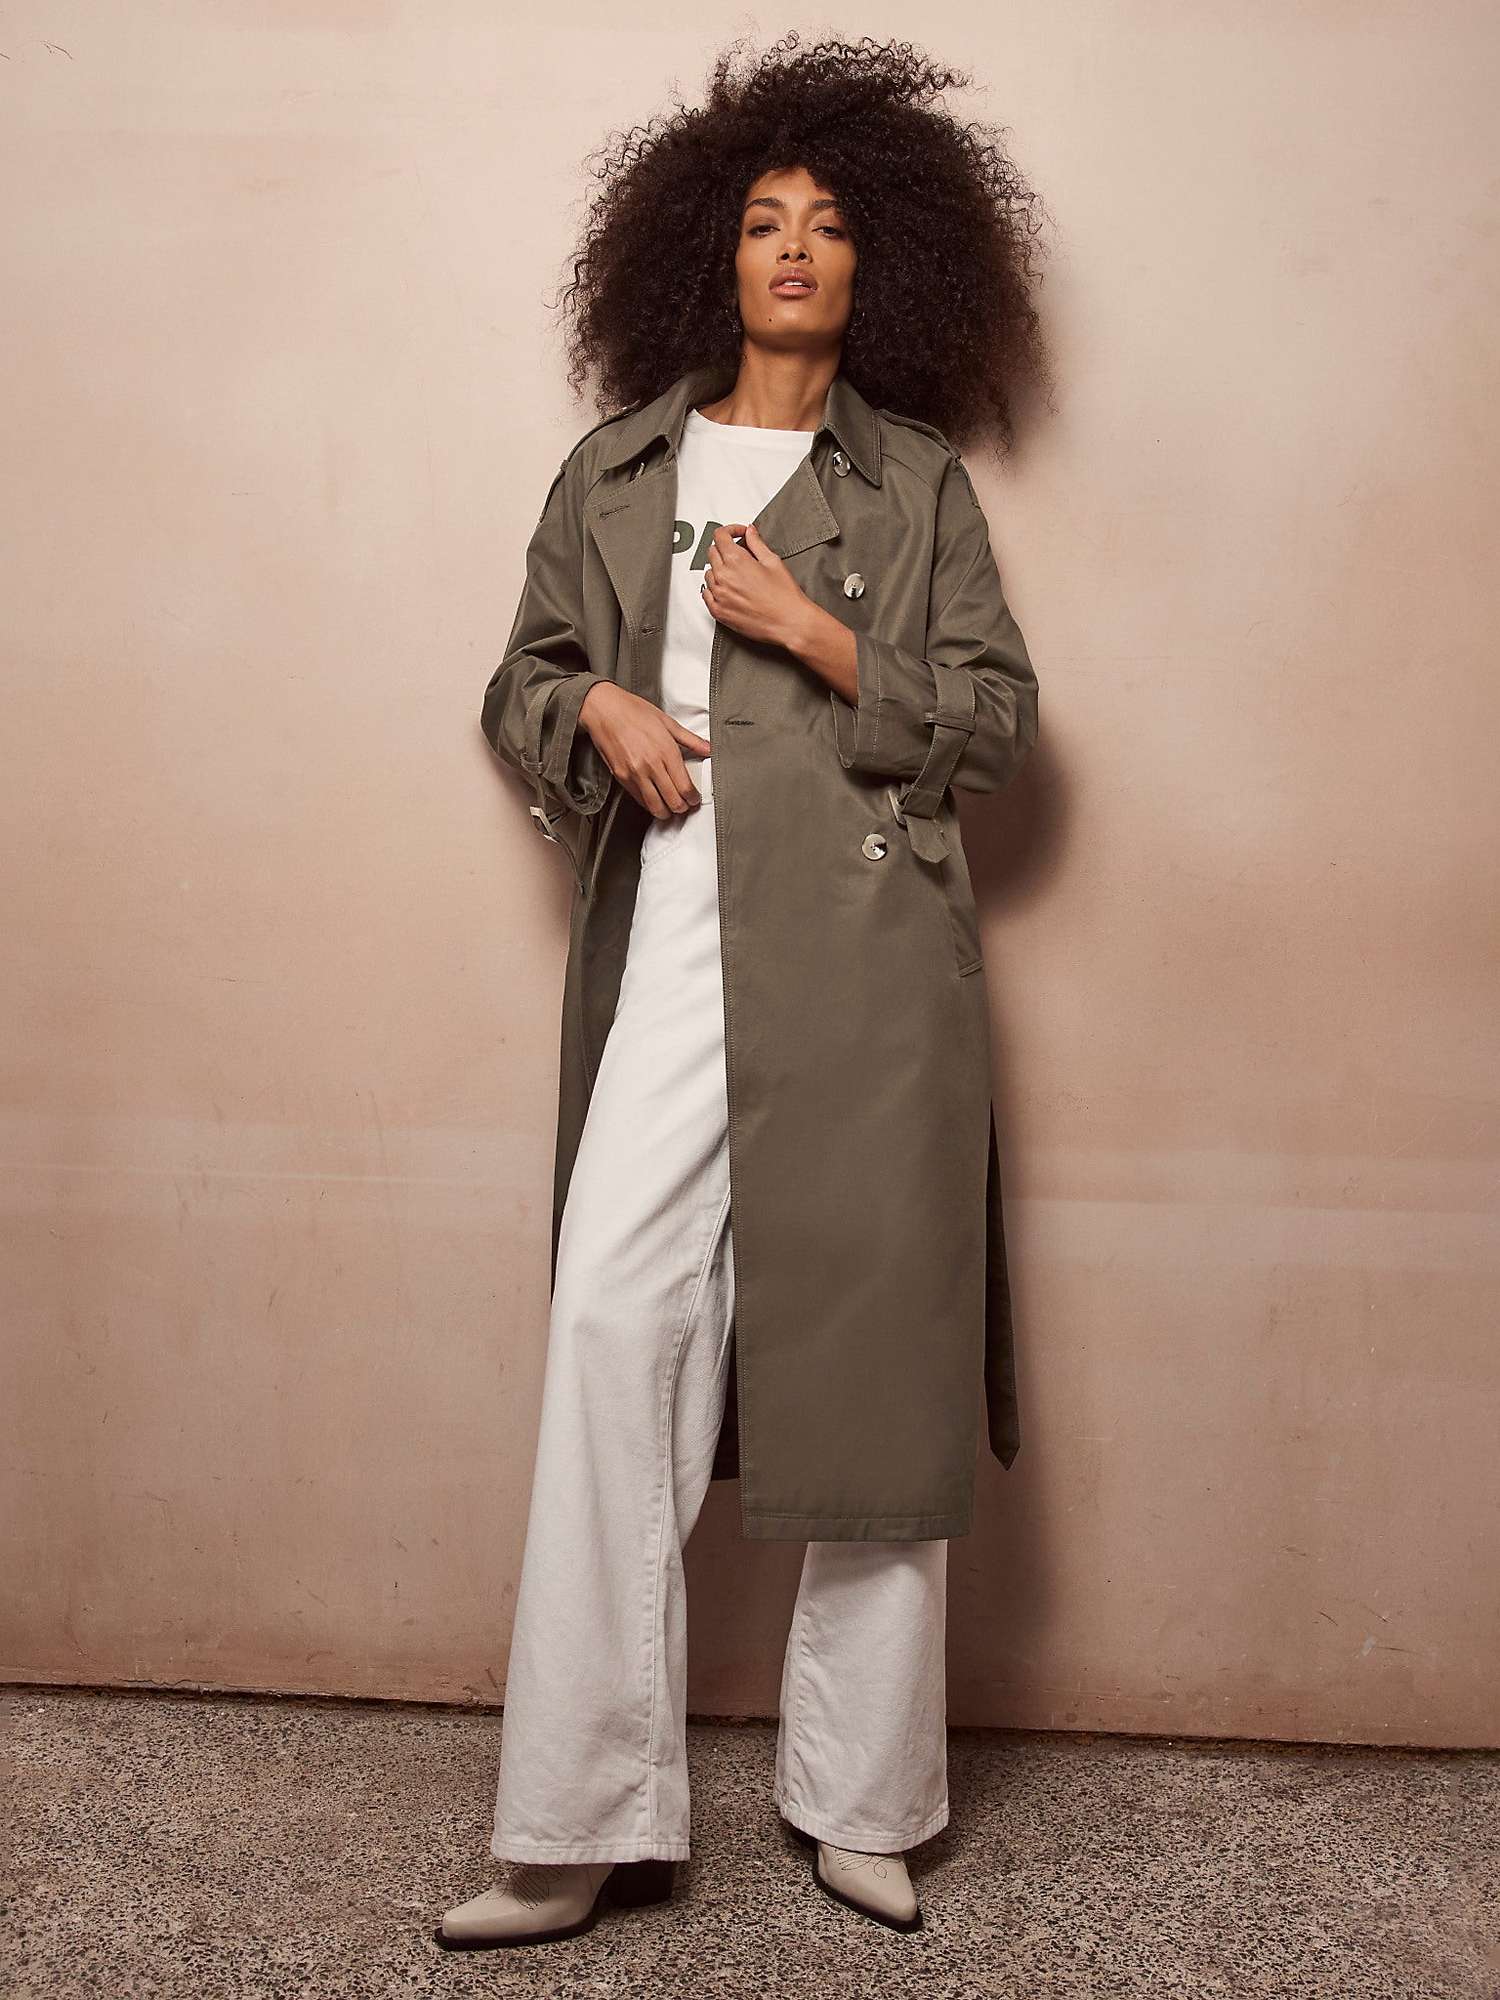 Buy Mint Velvet Double Breasted Longline Structured Trench Coat, Green Khaki Online at johnlewis.com